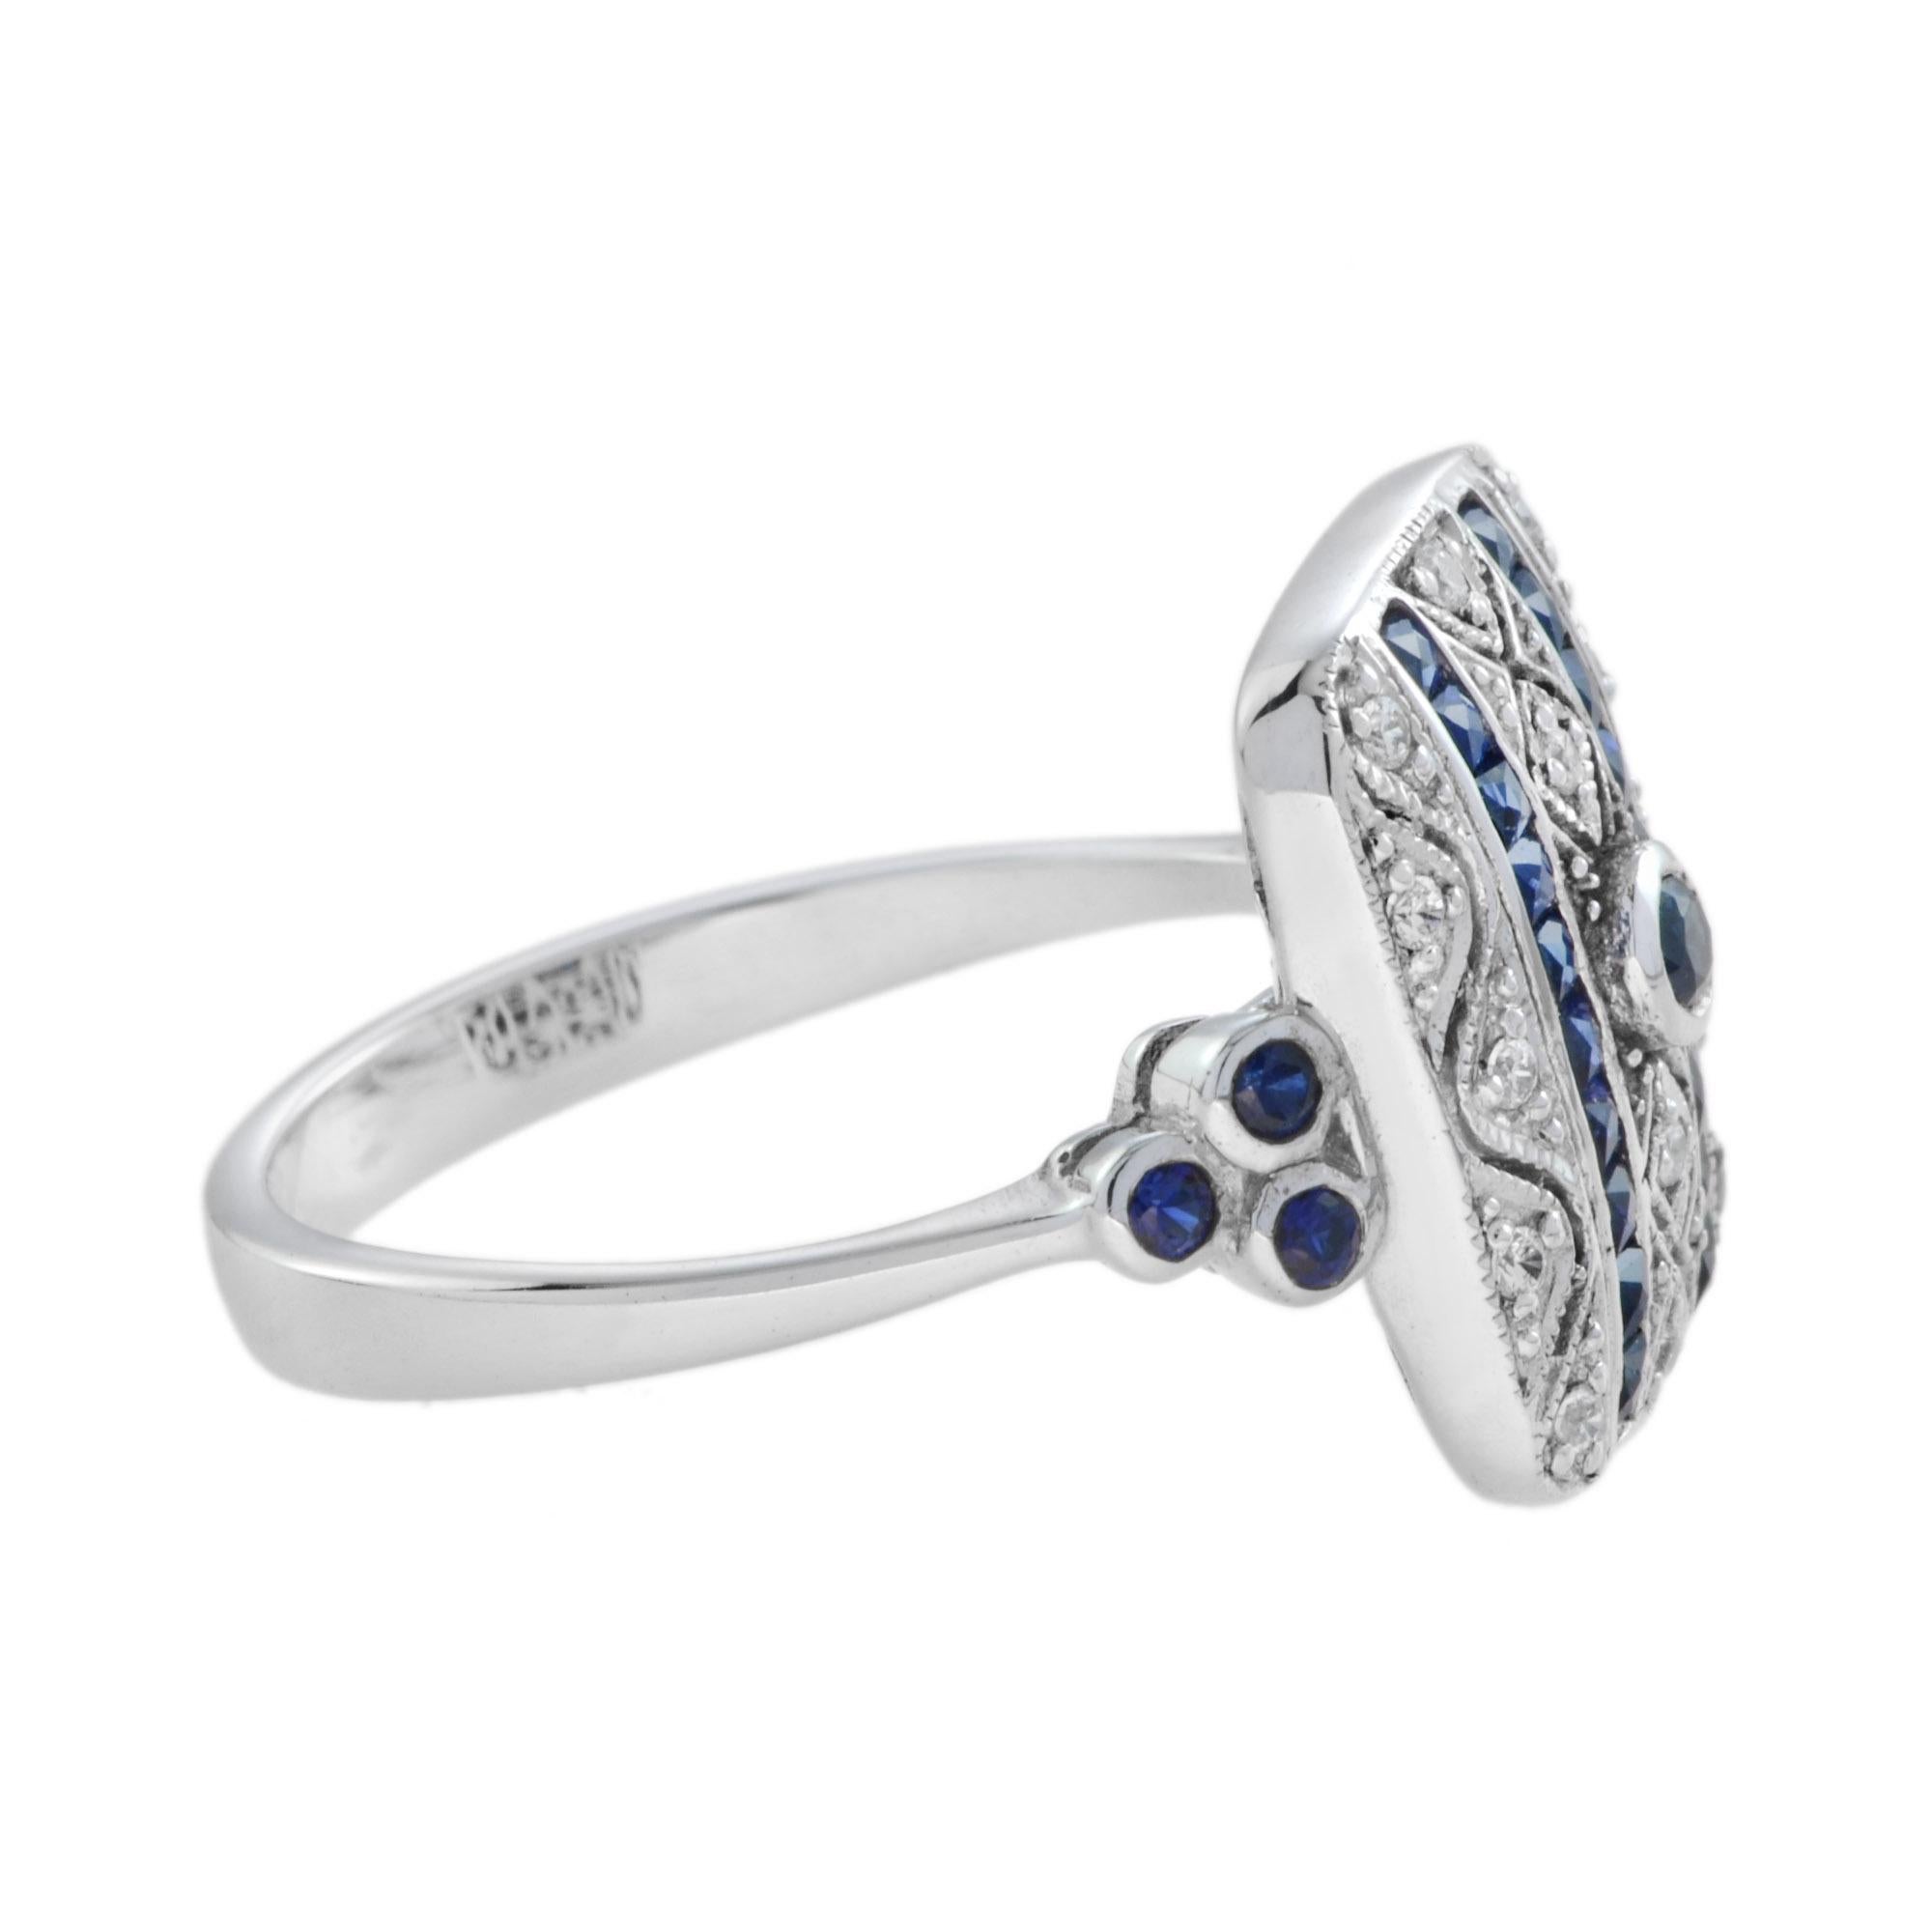 For Sale:  Art Deco Style Sapphire and Diamond Square Ring in 14K White Gold 3